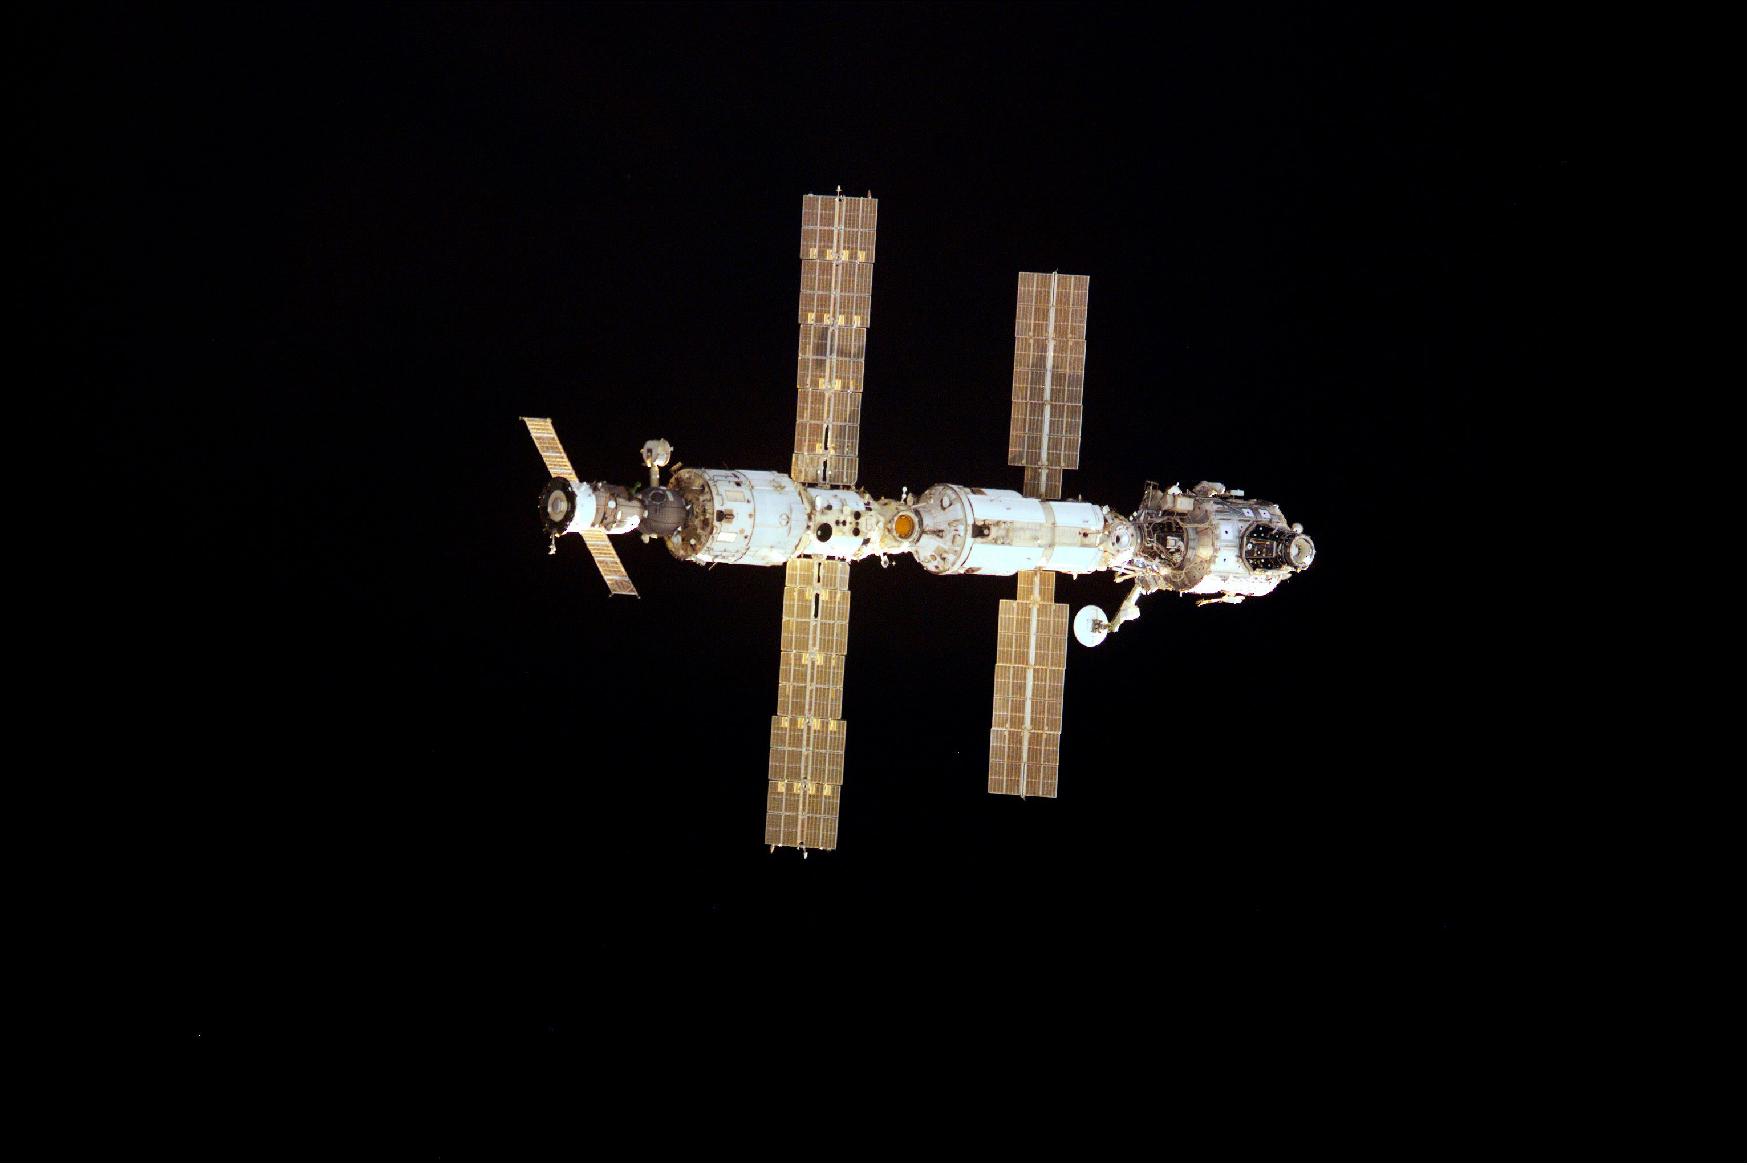 Figure 23: The ISS with its new solar arrays deployed against darkness of space on December 2, 2000. The photograph was taken by STS-97 crew members onboard the approaching Space Shuttle Endeavour (image credit: NASA)